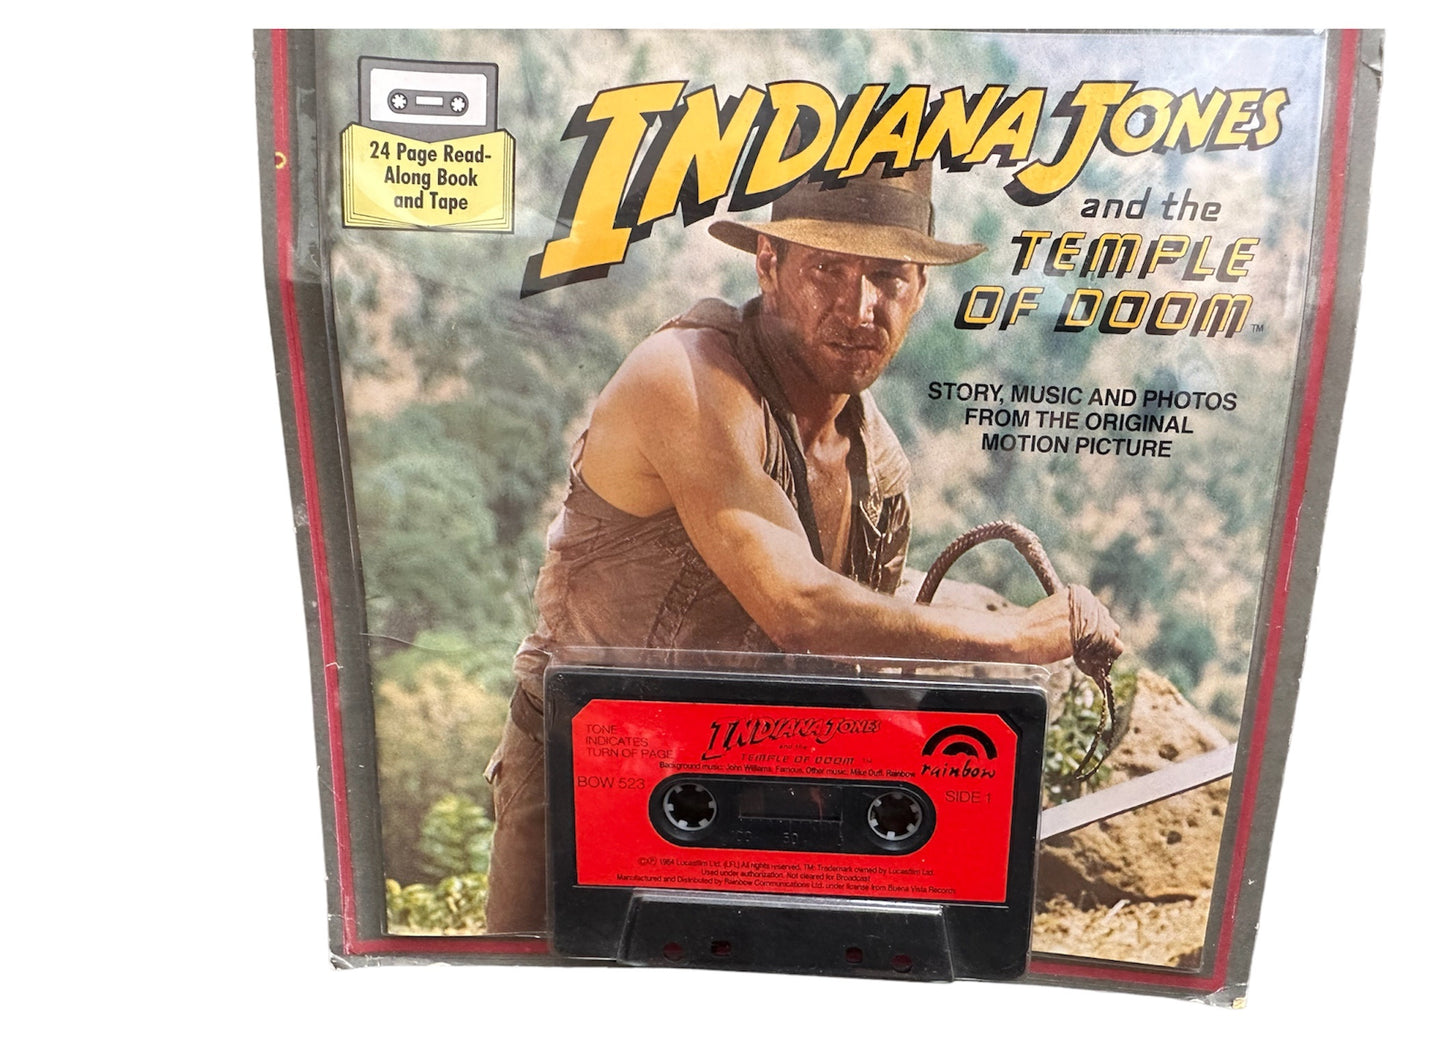 Vintage 1984 Indiana Jones And The Temple Of Doom 24 Page Read Along Book and Audio Cassette Tape Set - Factory Sealed Shop Stock Room Find